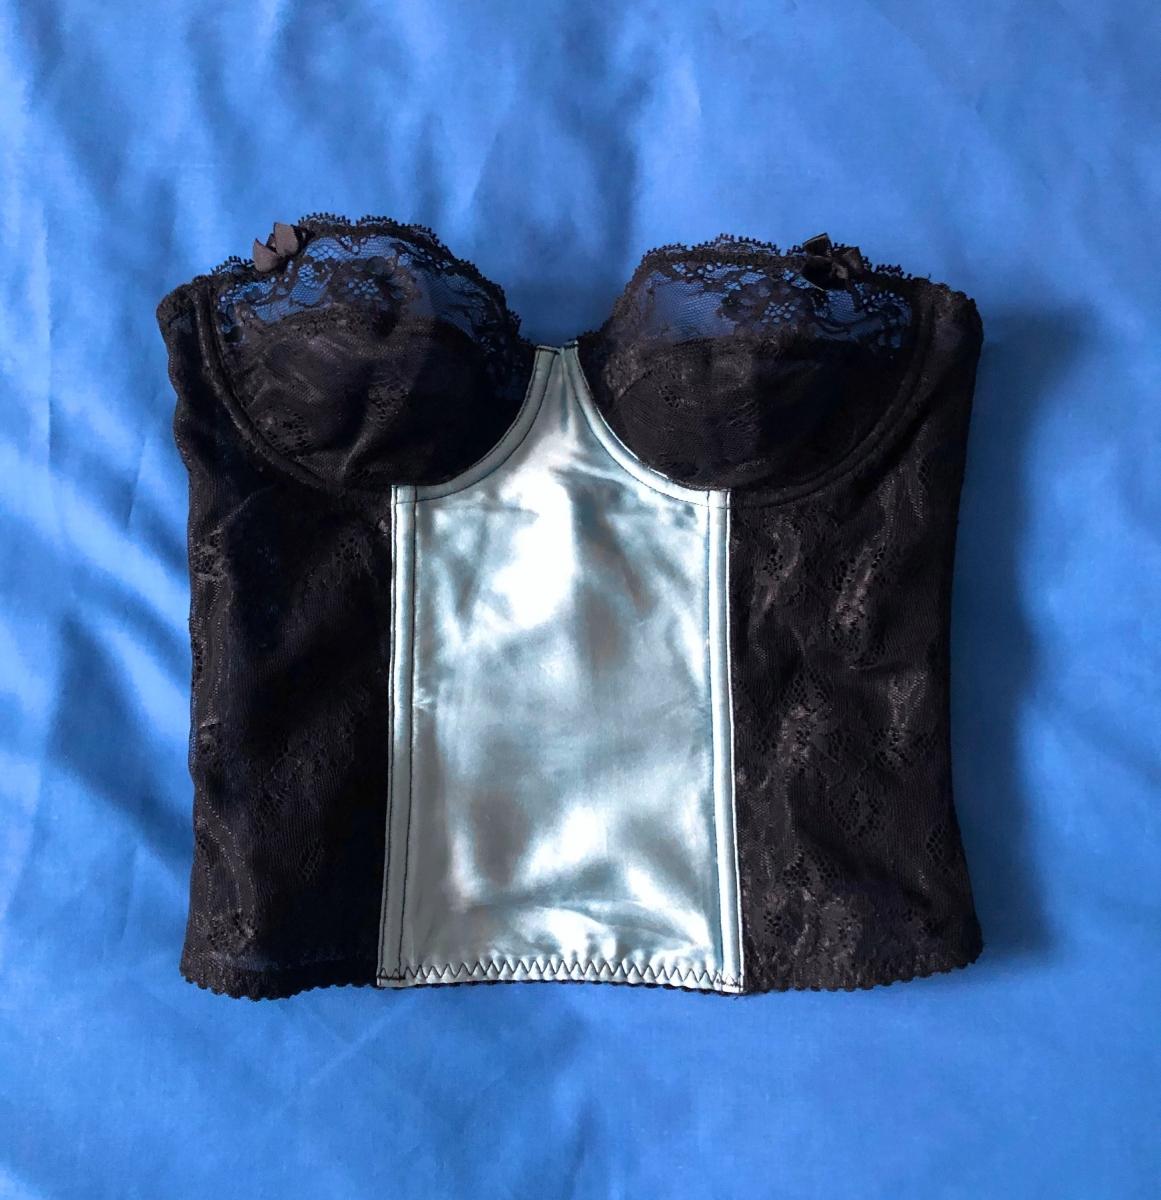 Burberry lace corset, black lace, frontal blue satin detail, back closure 
Size: 32b
XXS 
In very good vintage condition, 1990s